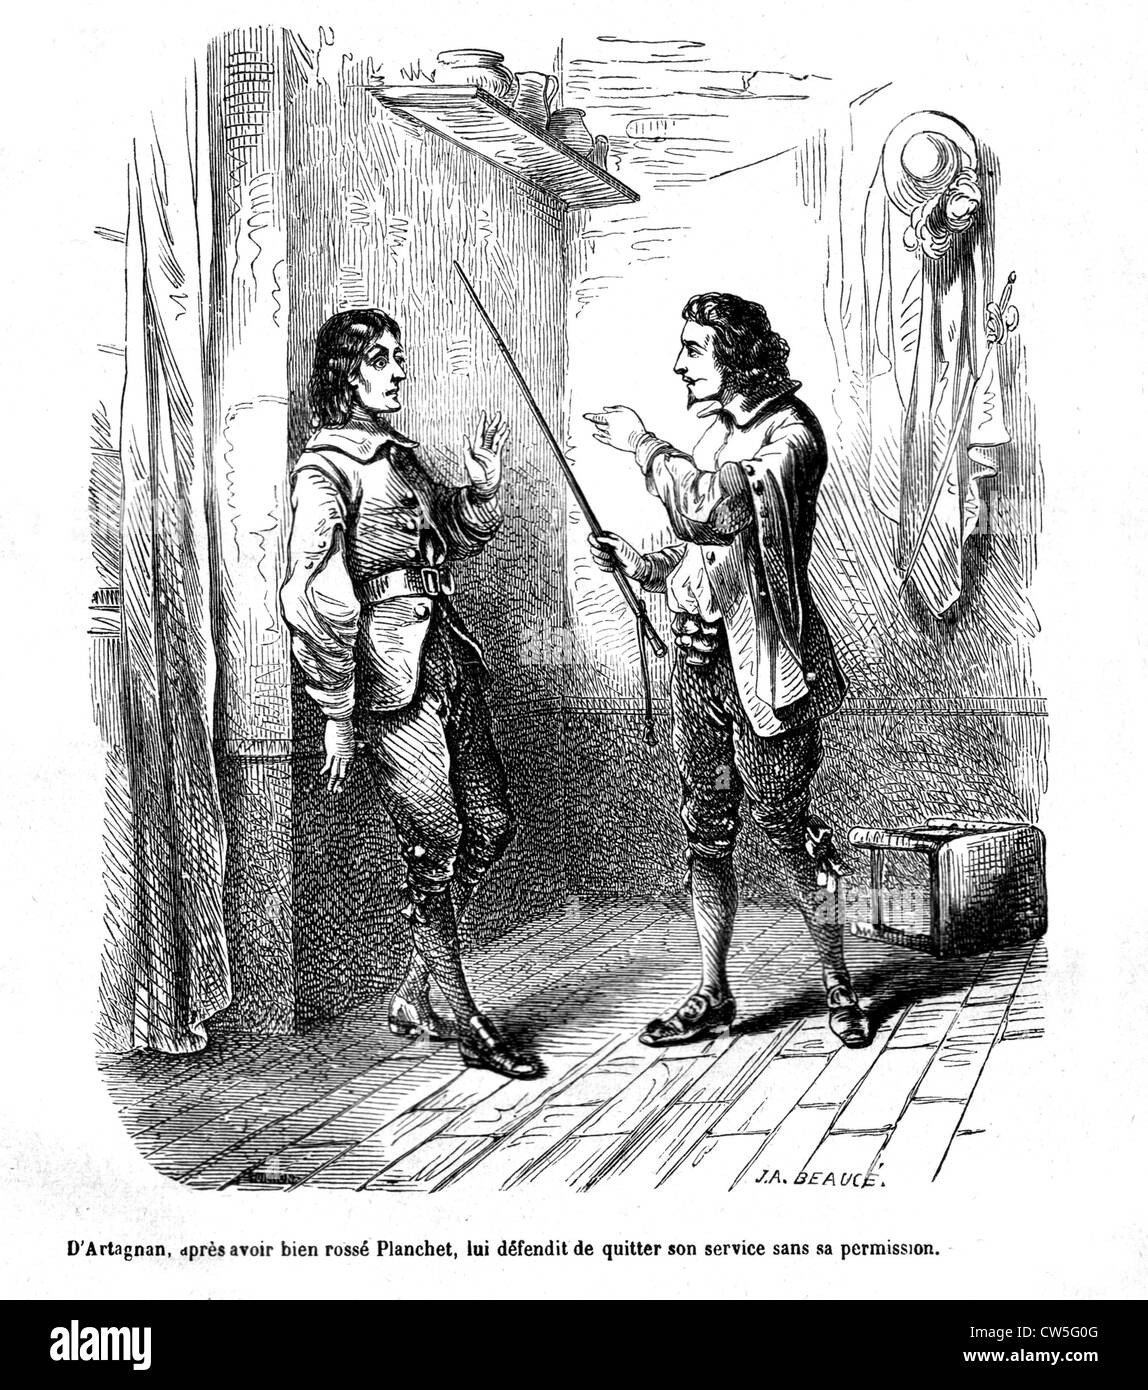 The Three Musketeers, illustration featuring d'Artagnan Stock Photo